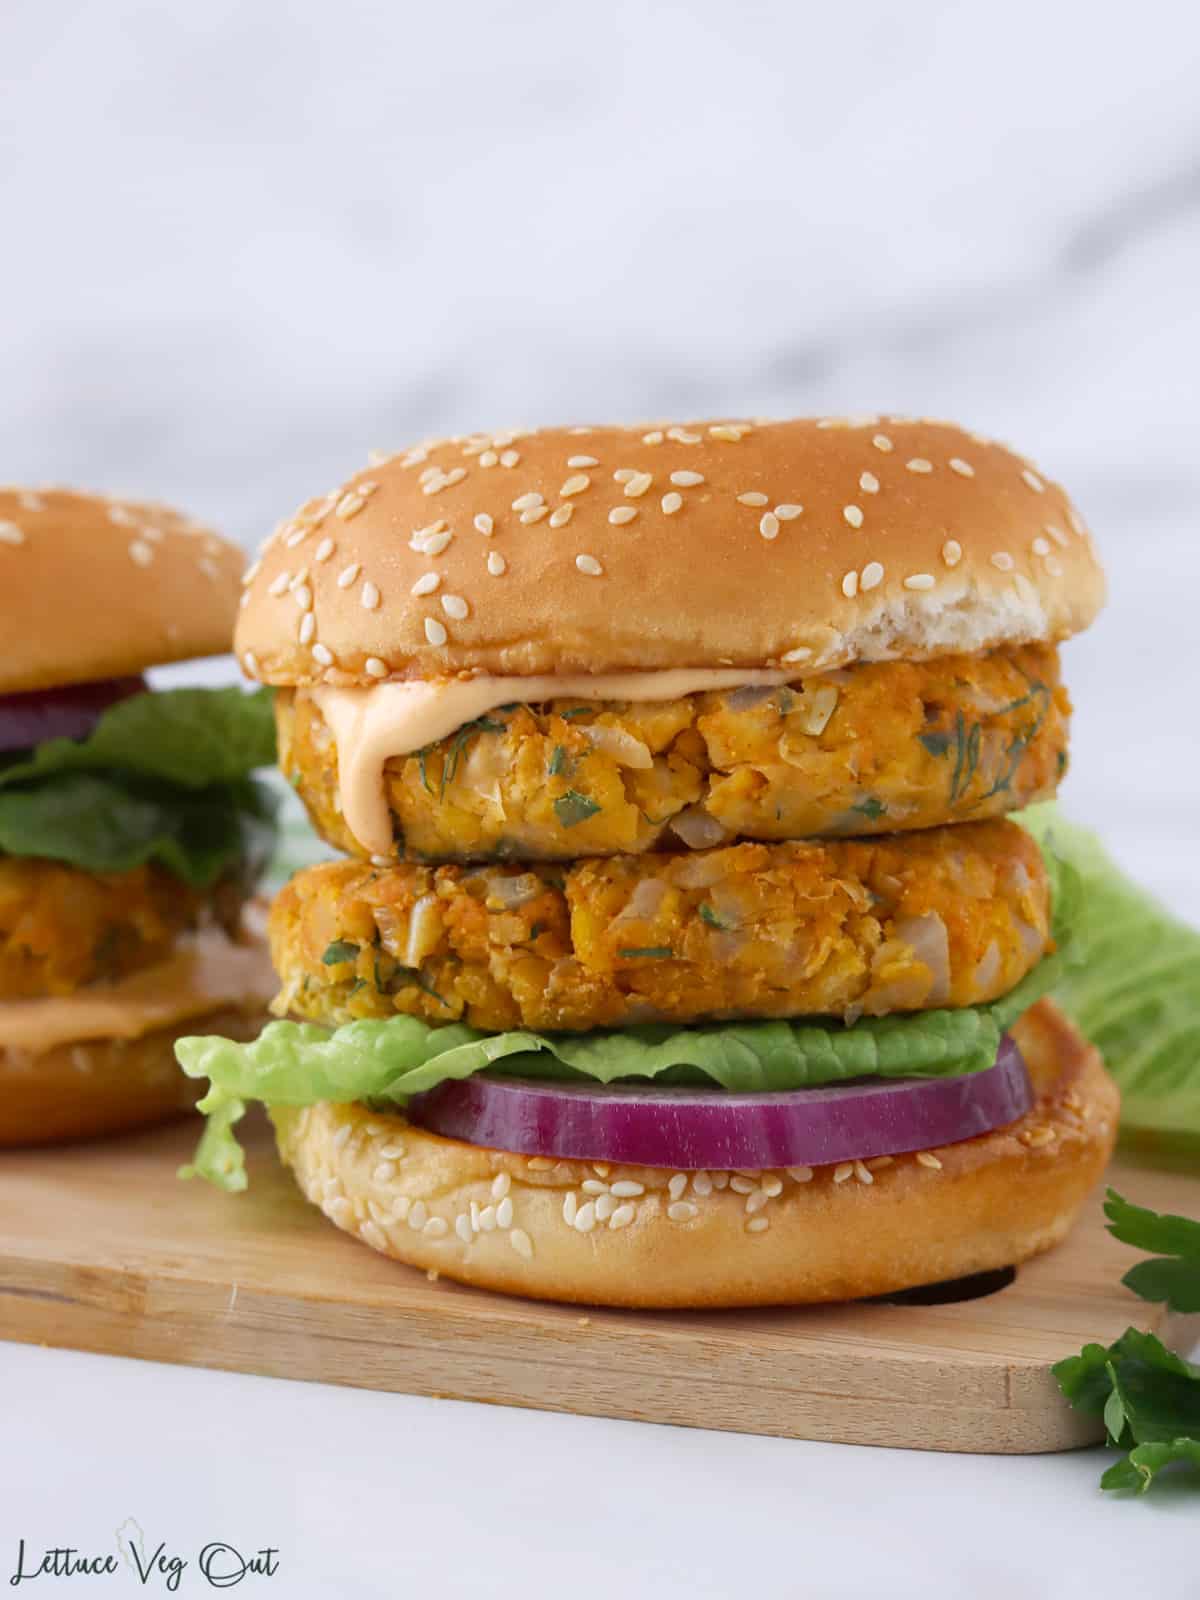 A double stacked chickpea patty burger with a fluffy bun, sriracha mayo, red onion and lettuce.